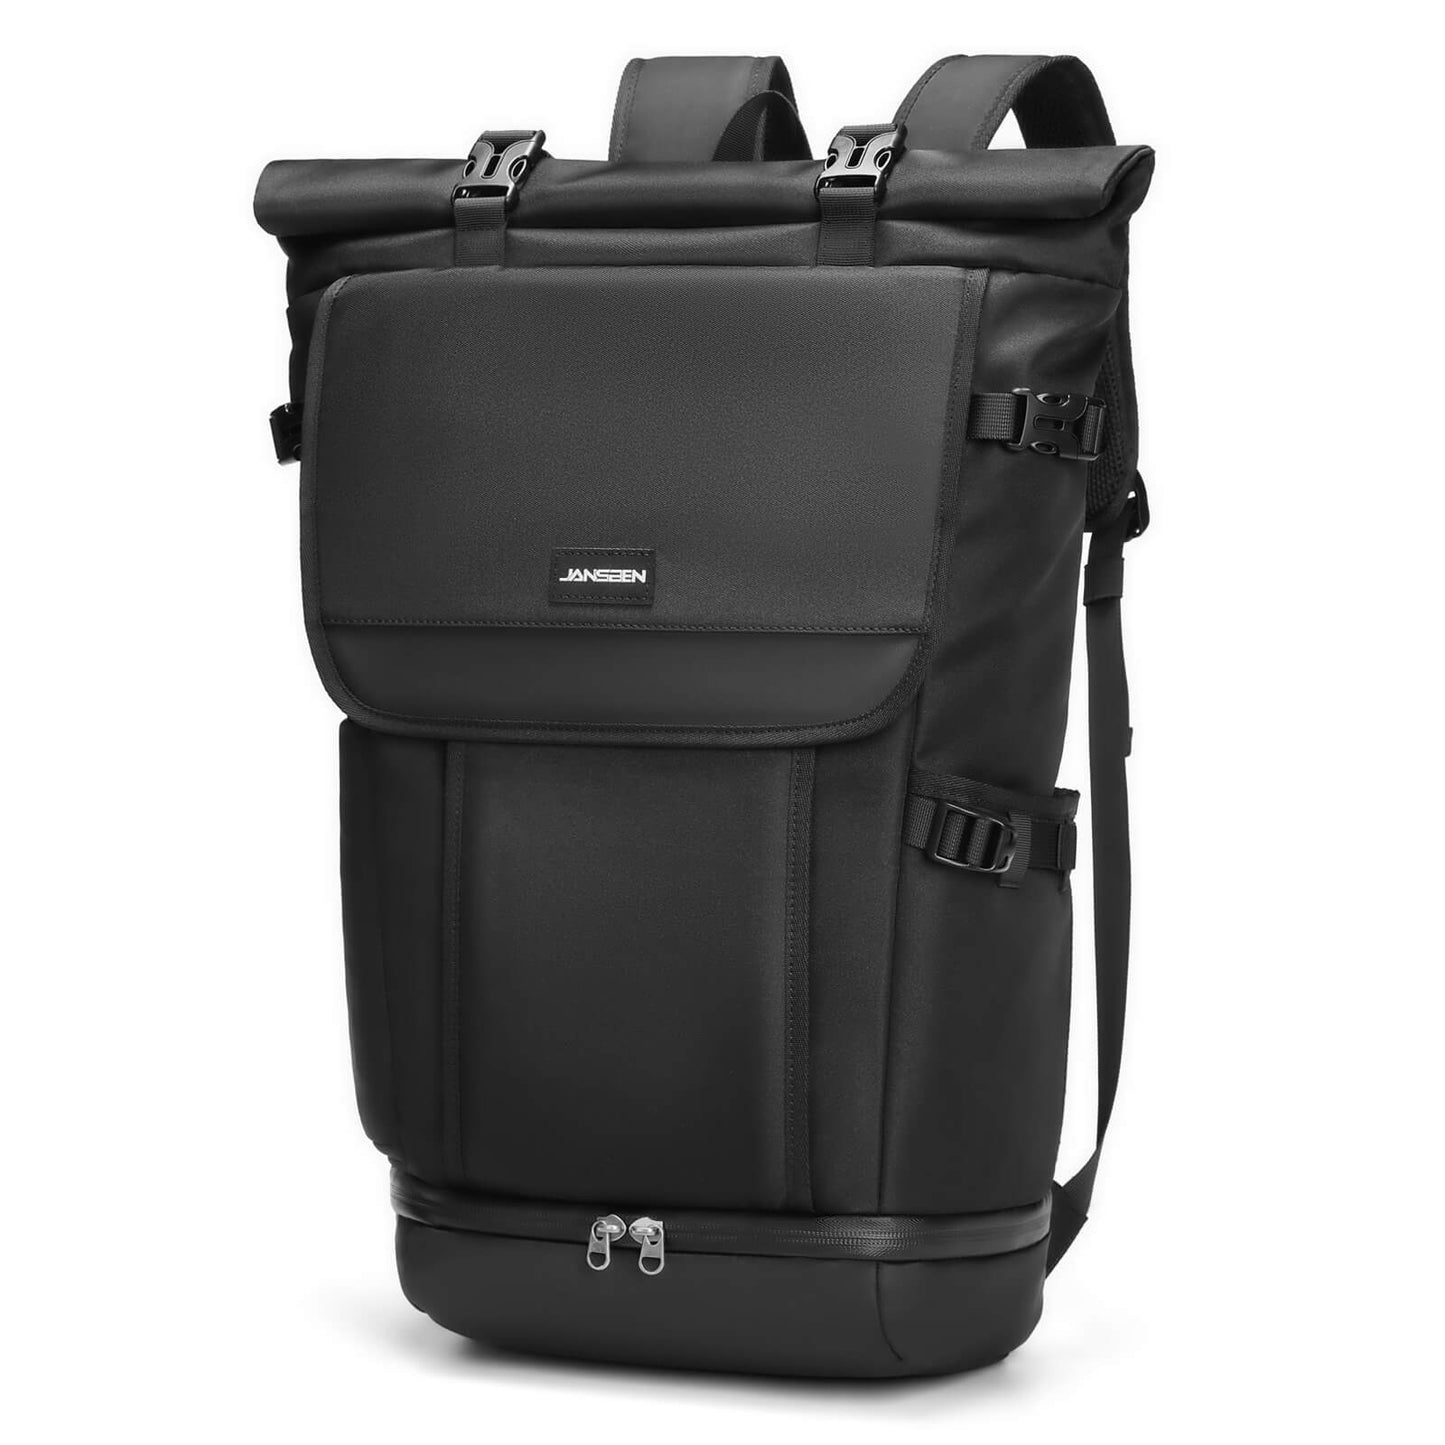 rolltop-backpack-shoes-compartment-Jansben-E058-side